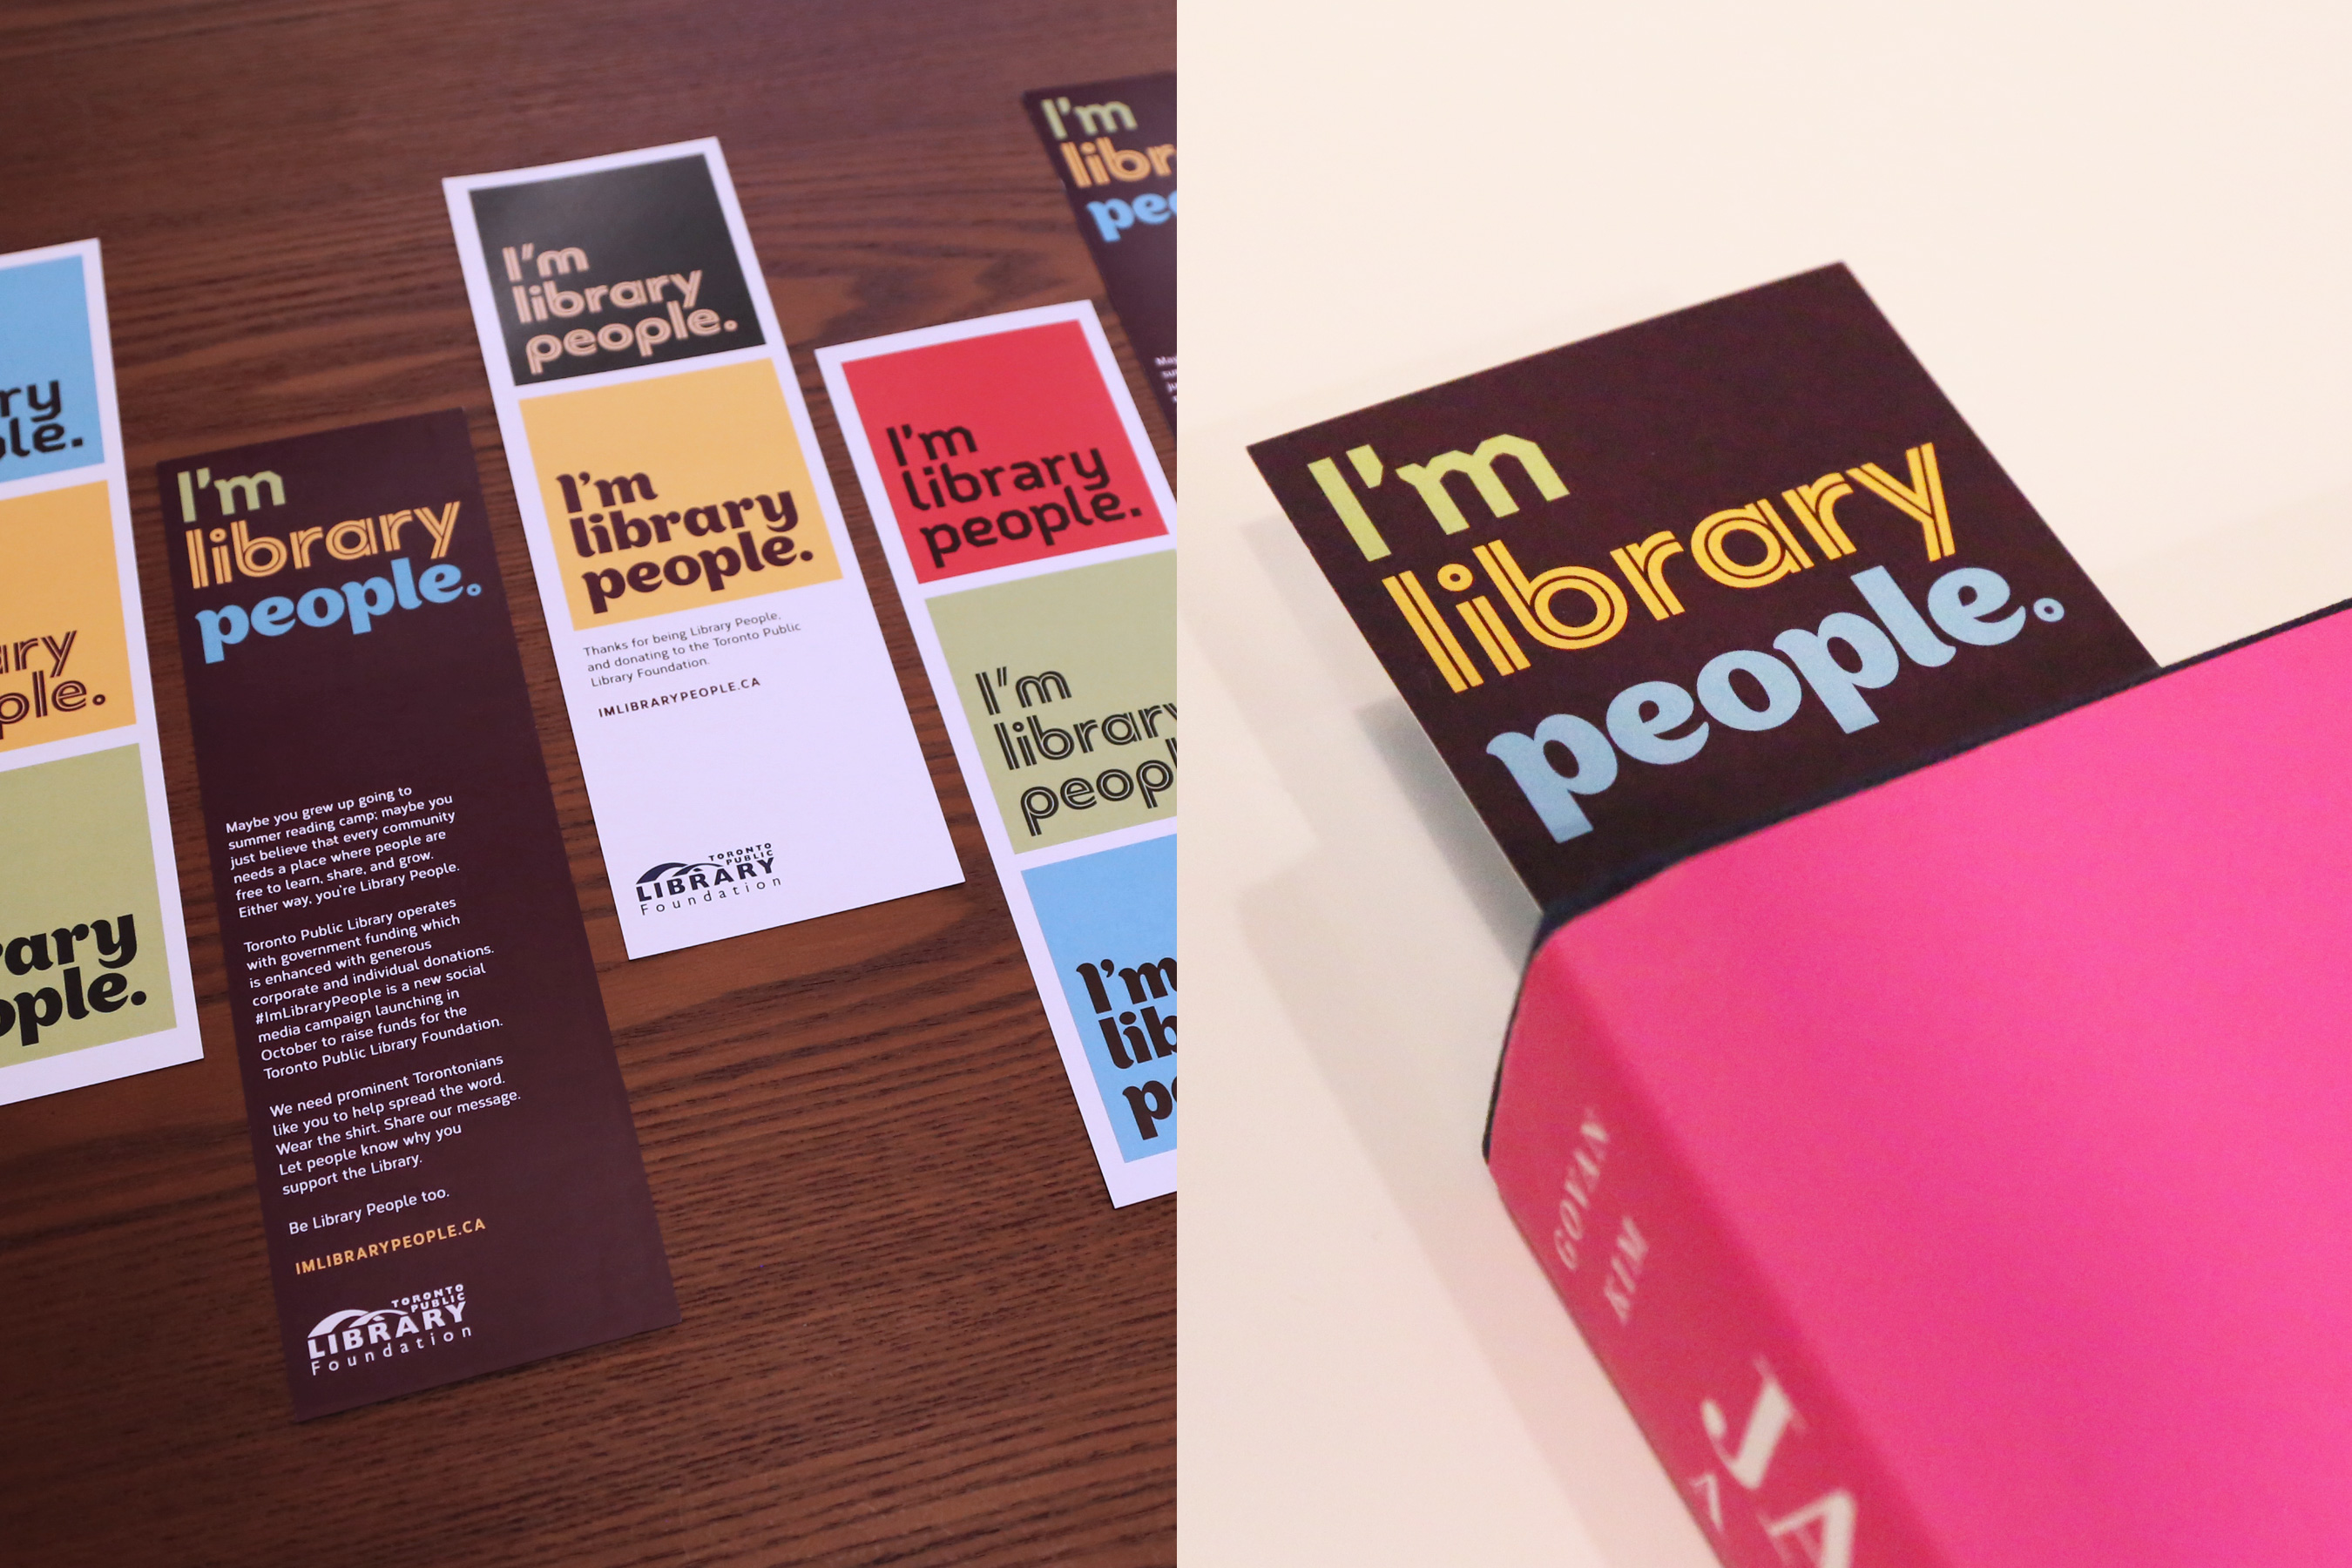 Toronto Public Library Foundation - I’m Library People